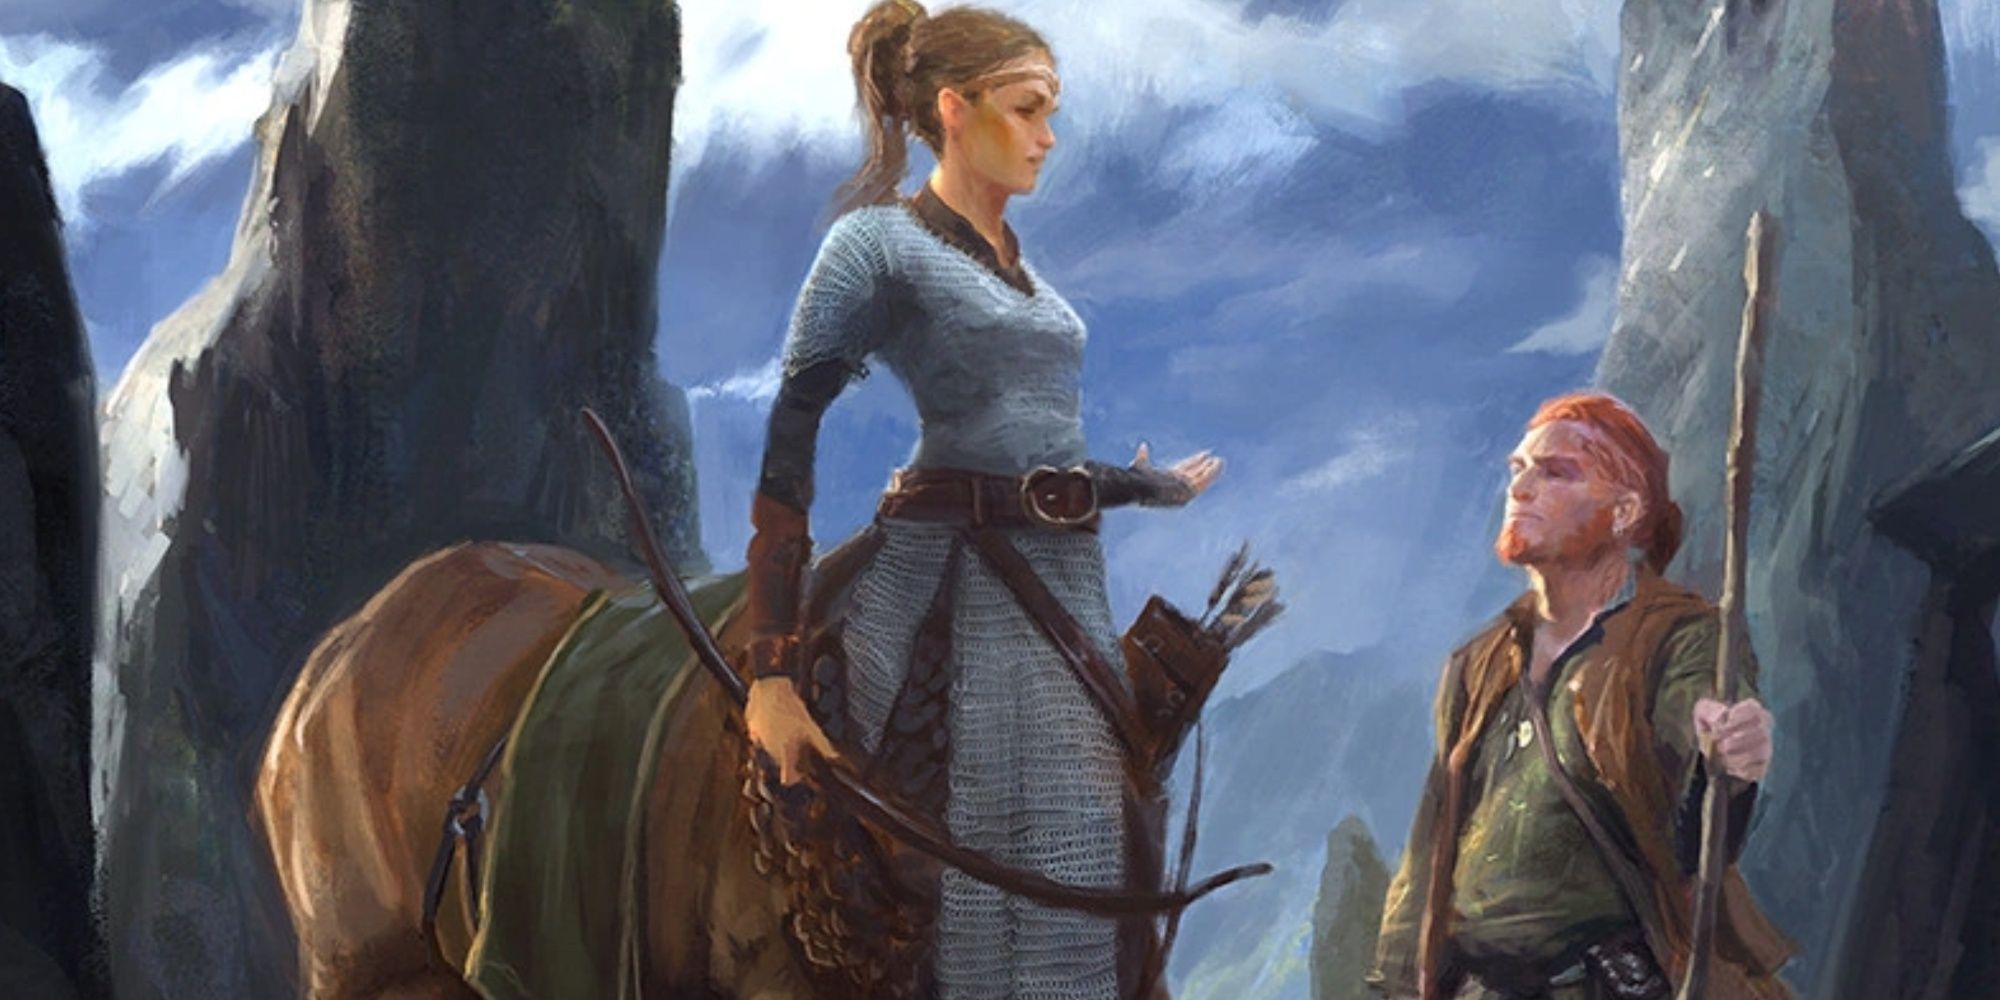 A_centaur_and_a_human_by_John_Anthony_Di_Giovanni cropped